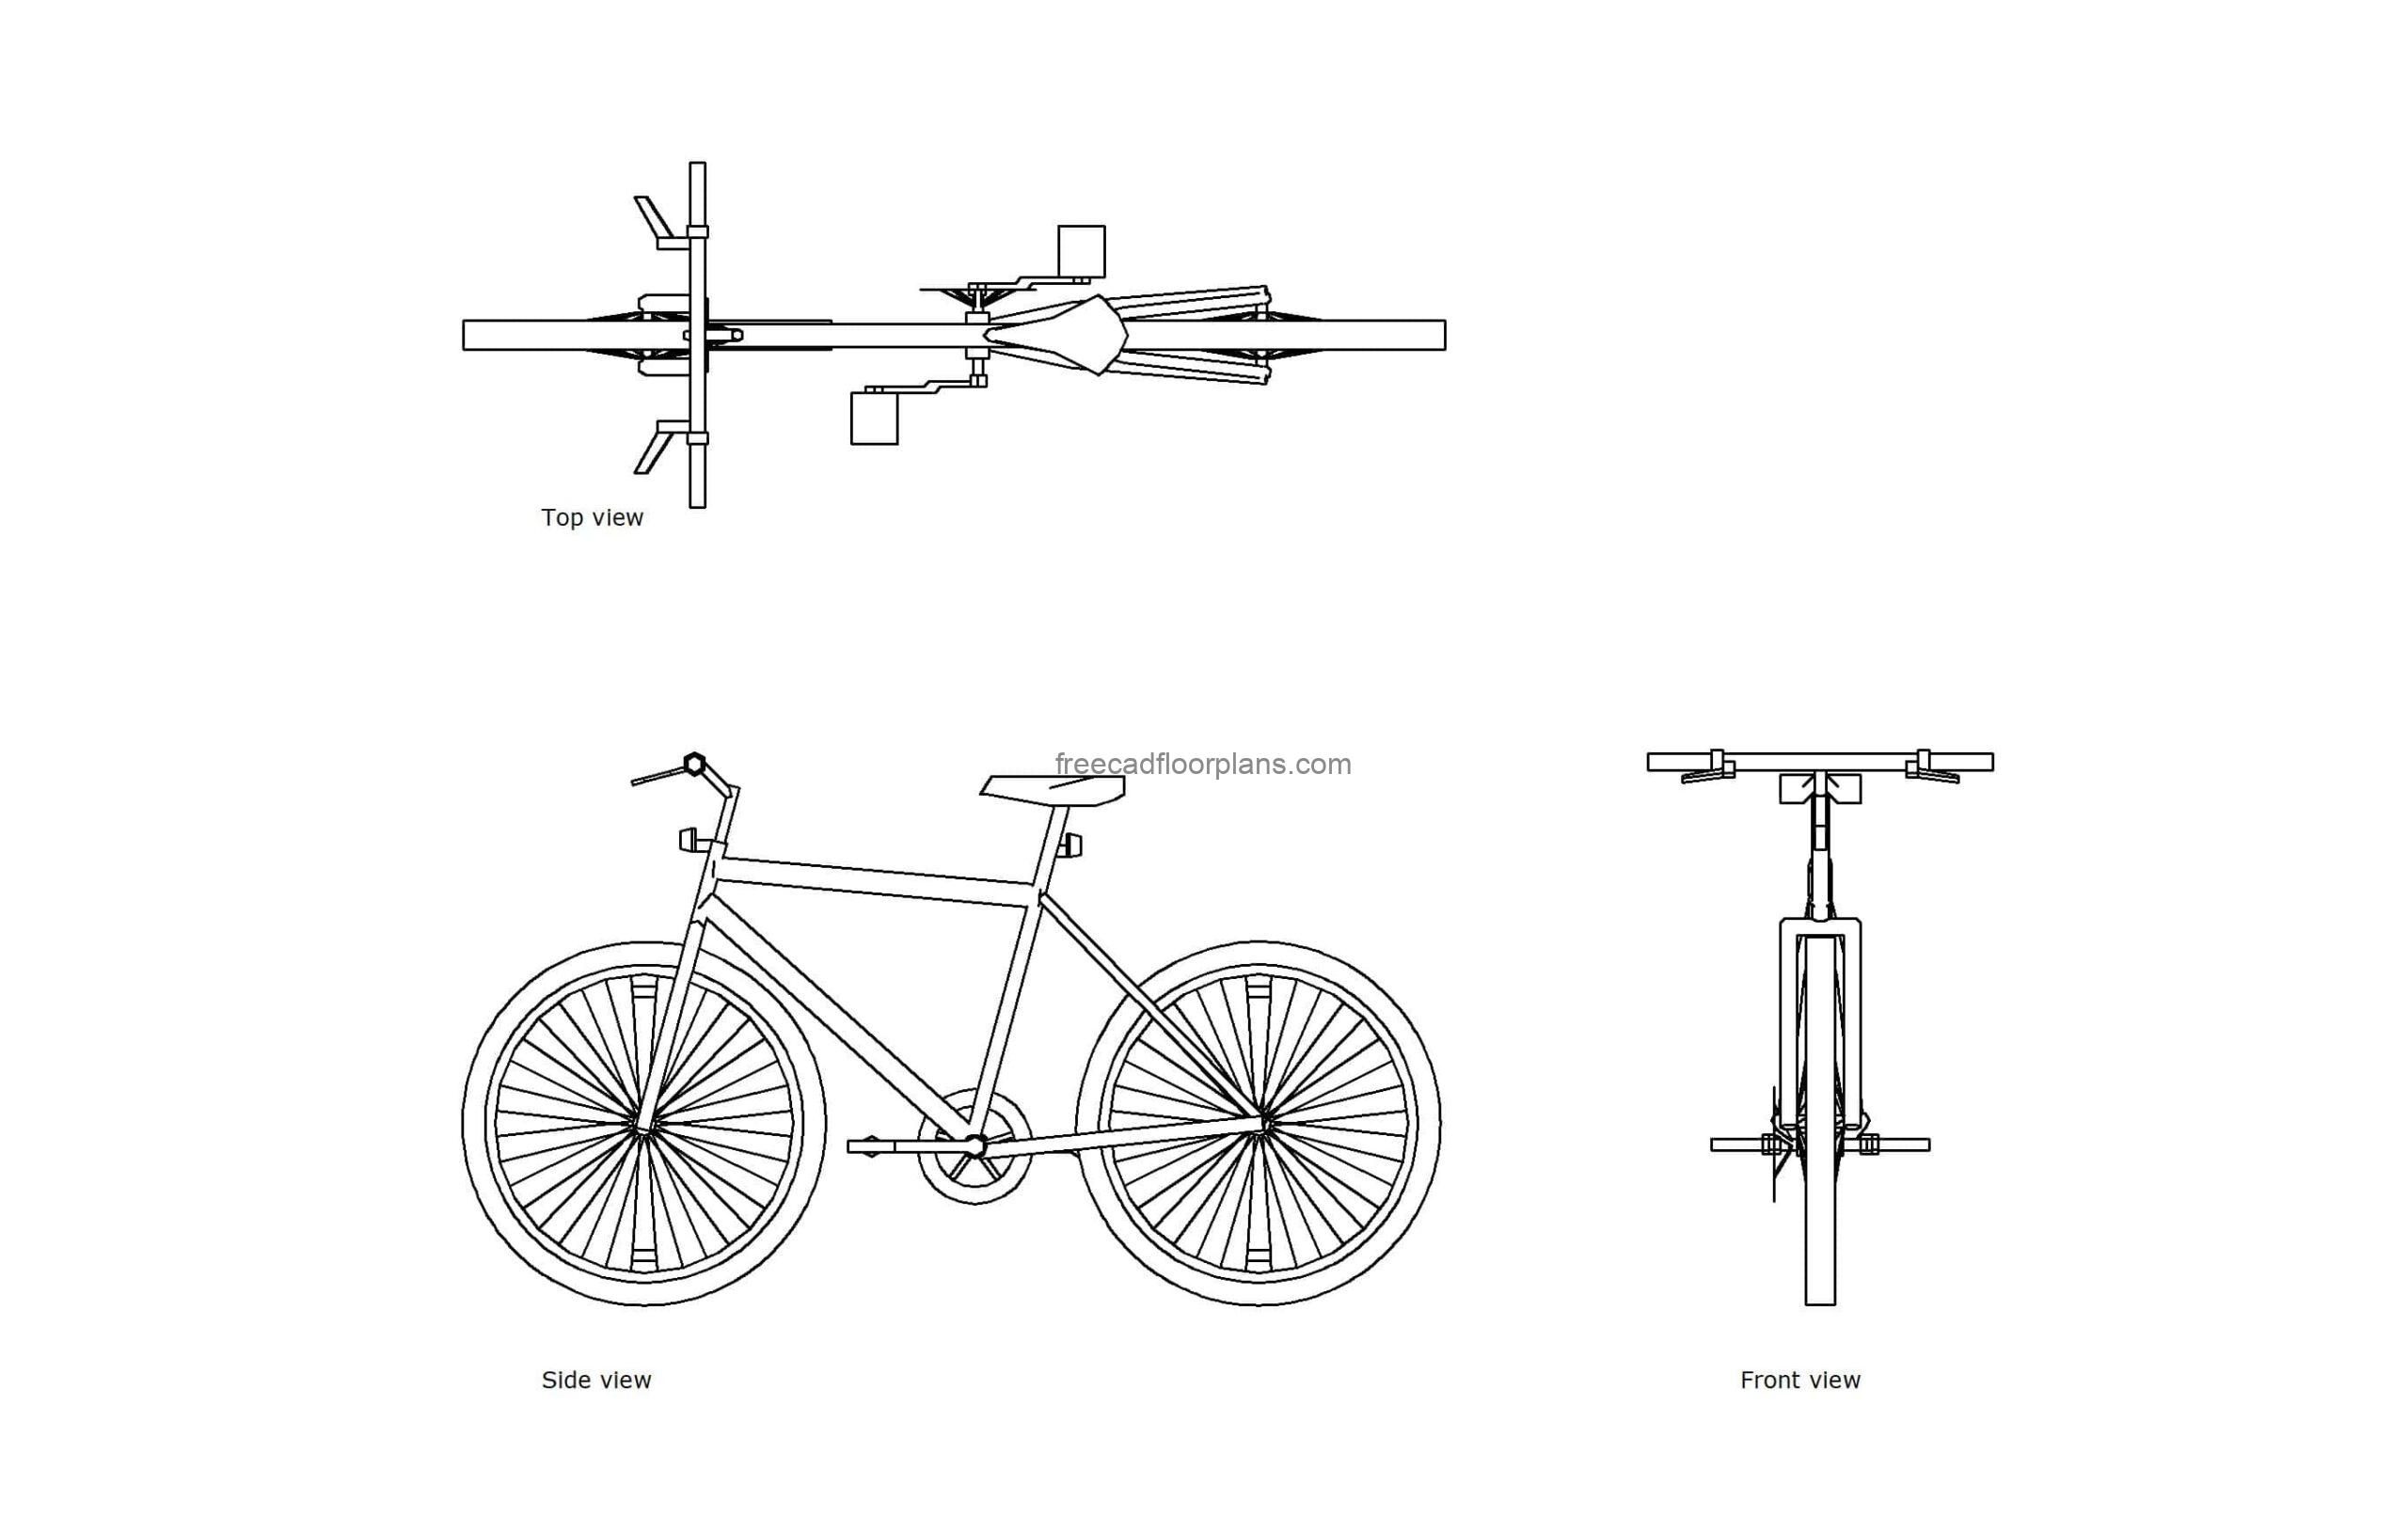 autocad drawing of a mountain bike, 2d views plan and elevation, dwg file free for download